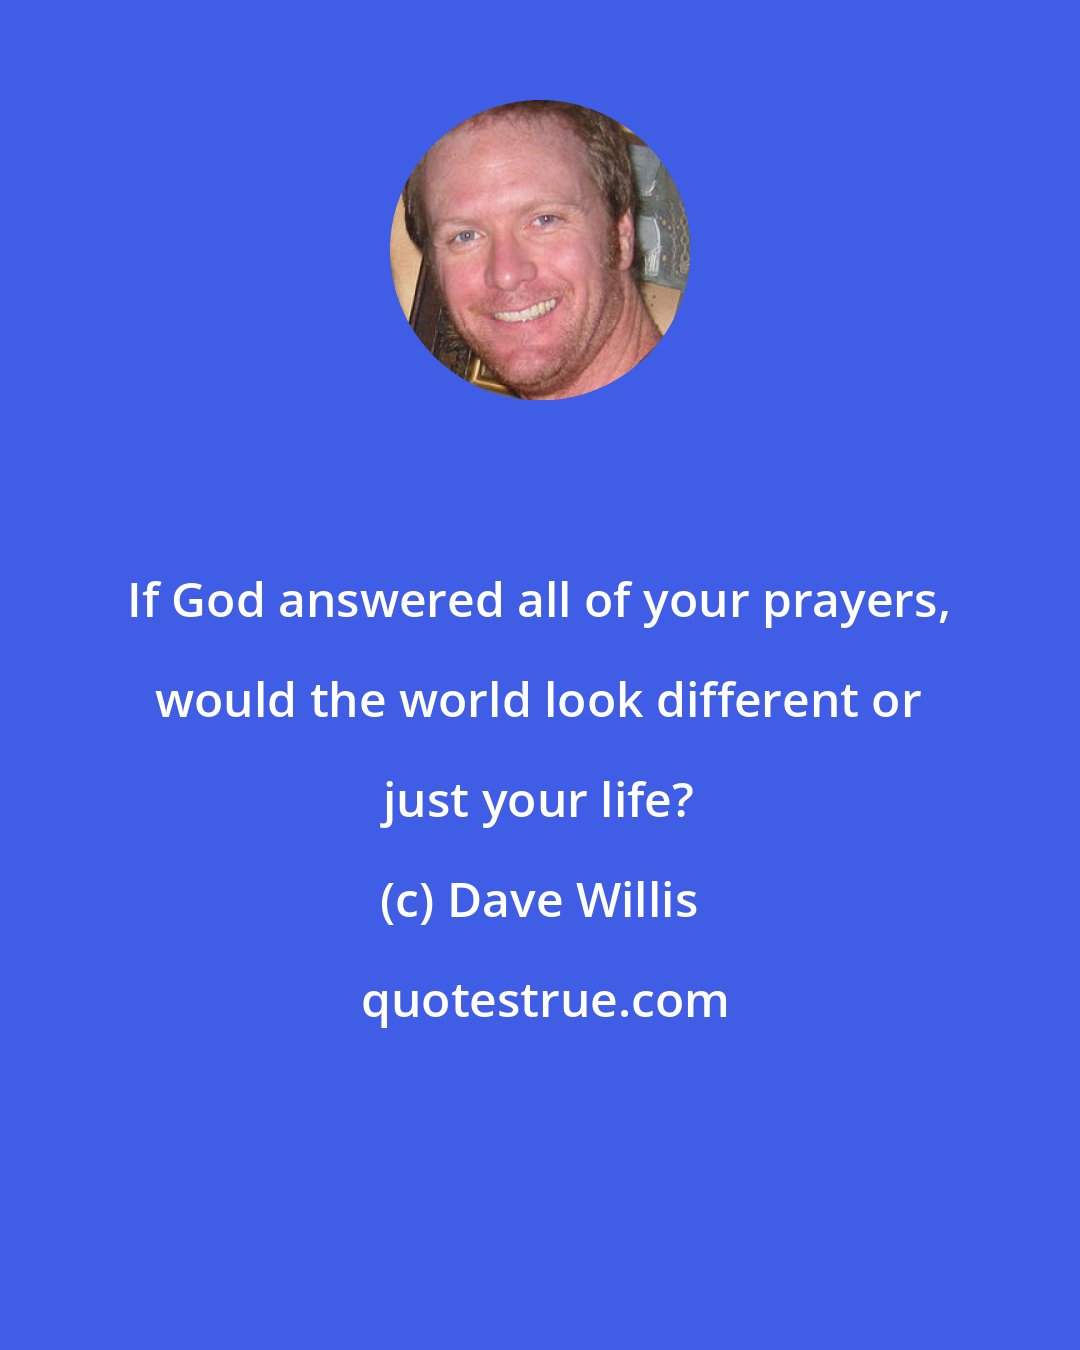 Dave Willis: If God answered all of your prayers, would the world look different or just your life?